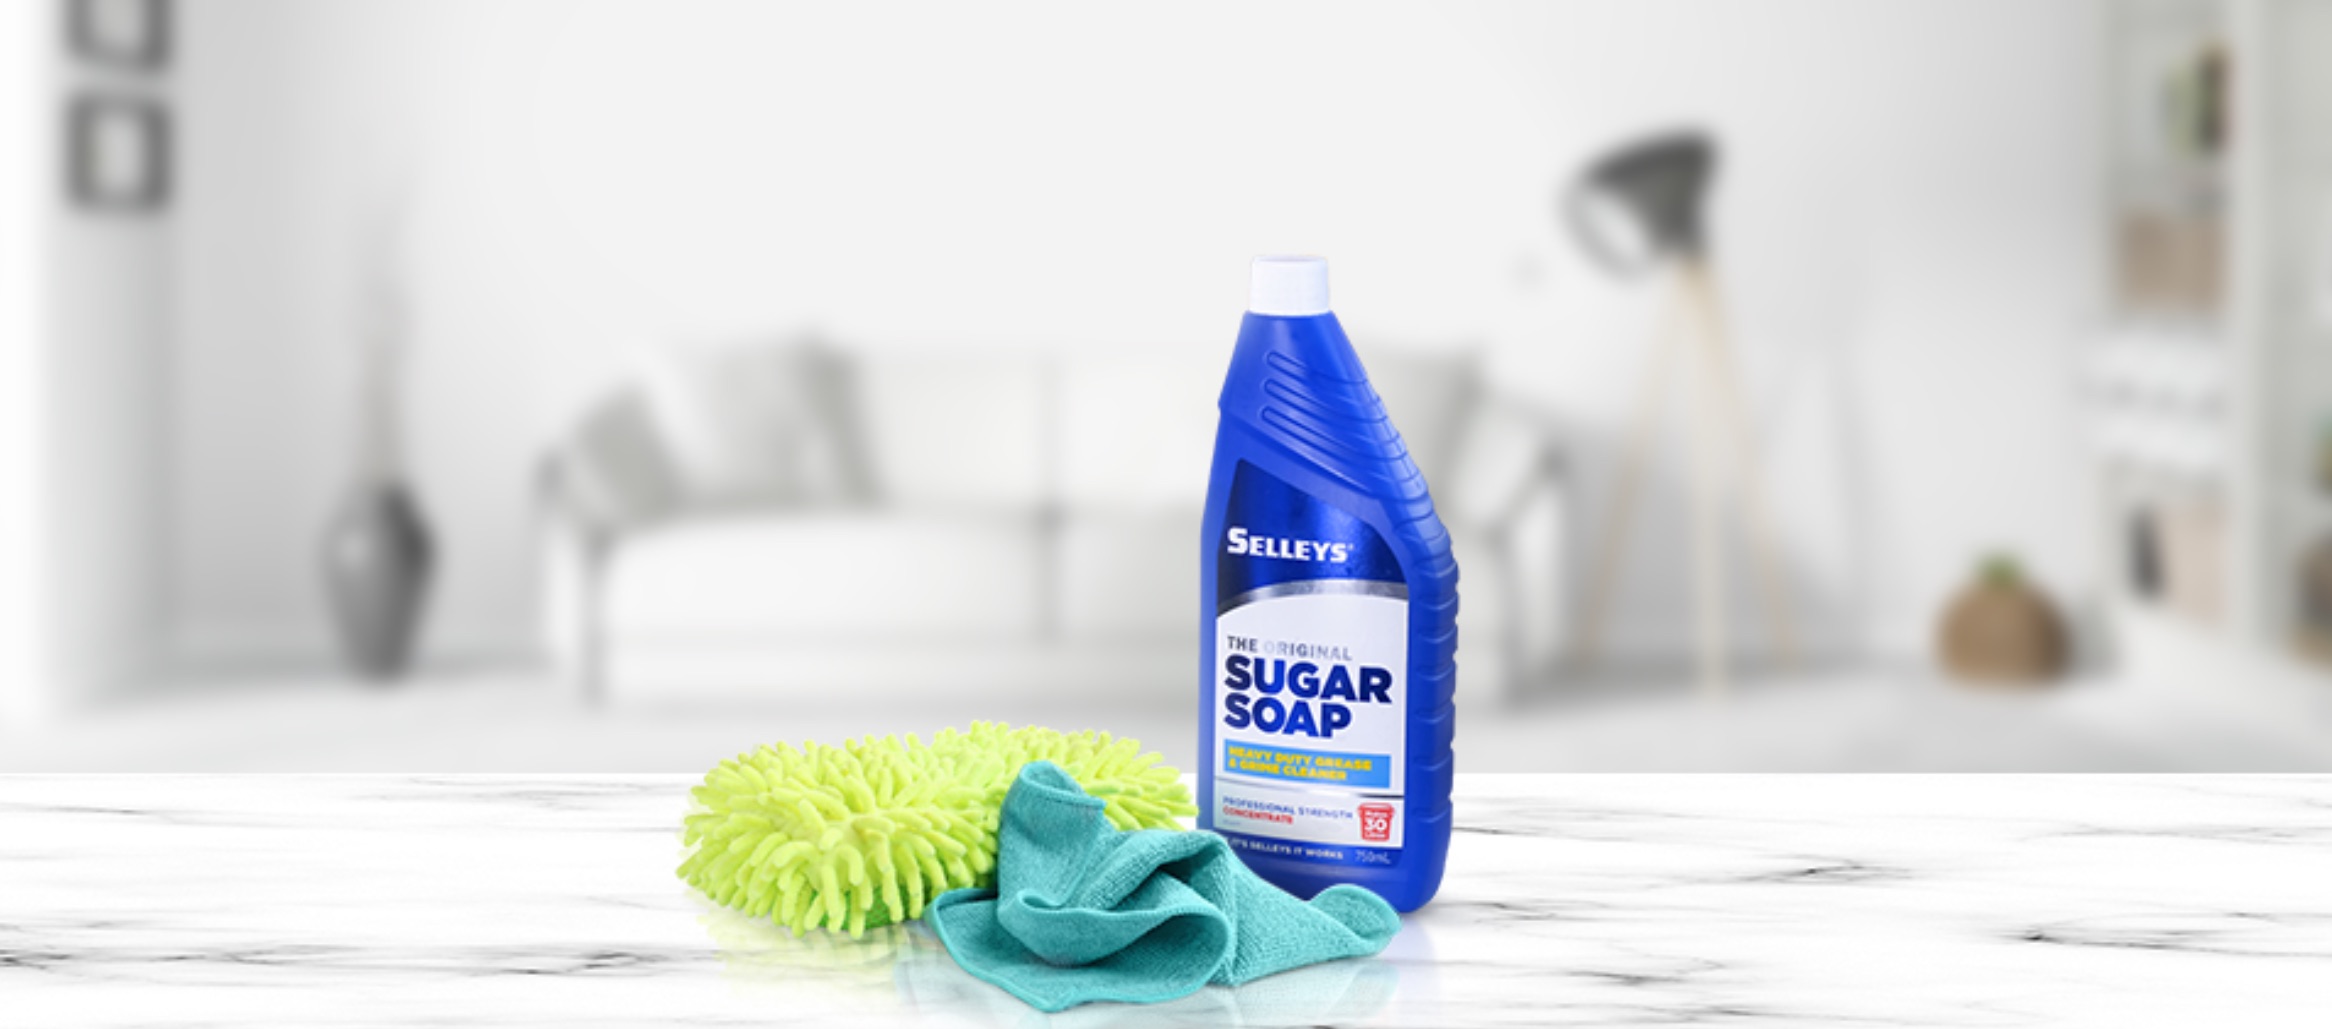 , How to use Liquid Sugar Soap to clean your kitchen and bathroom and prep your walls